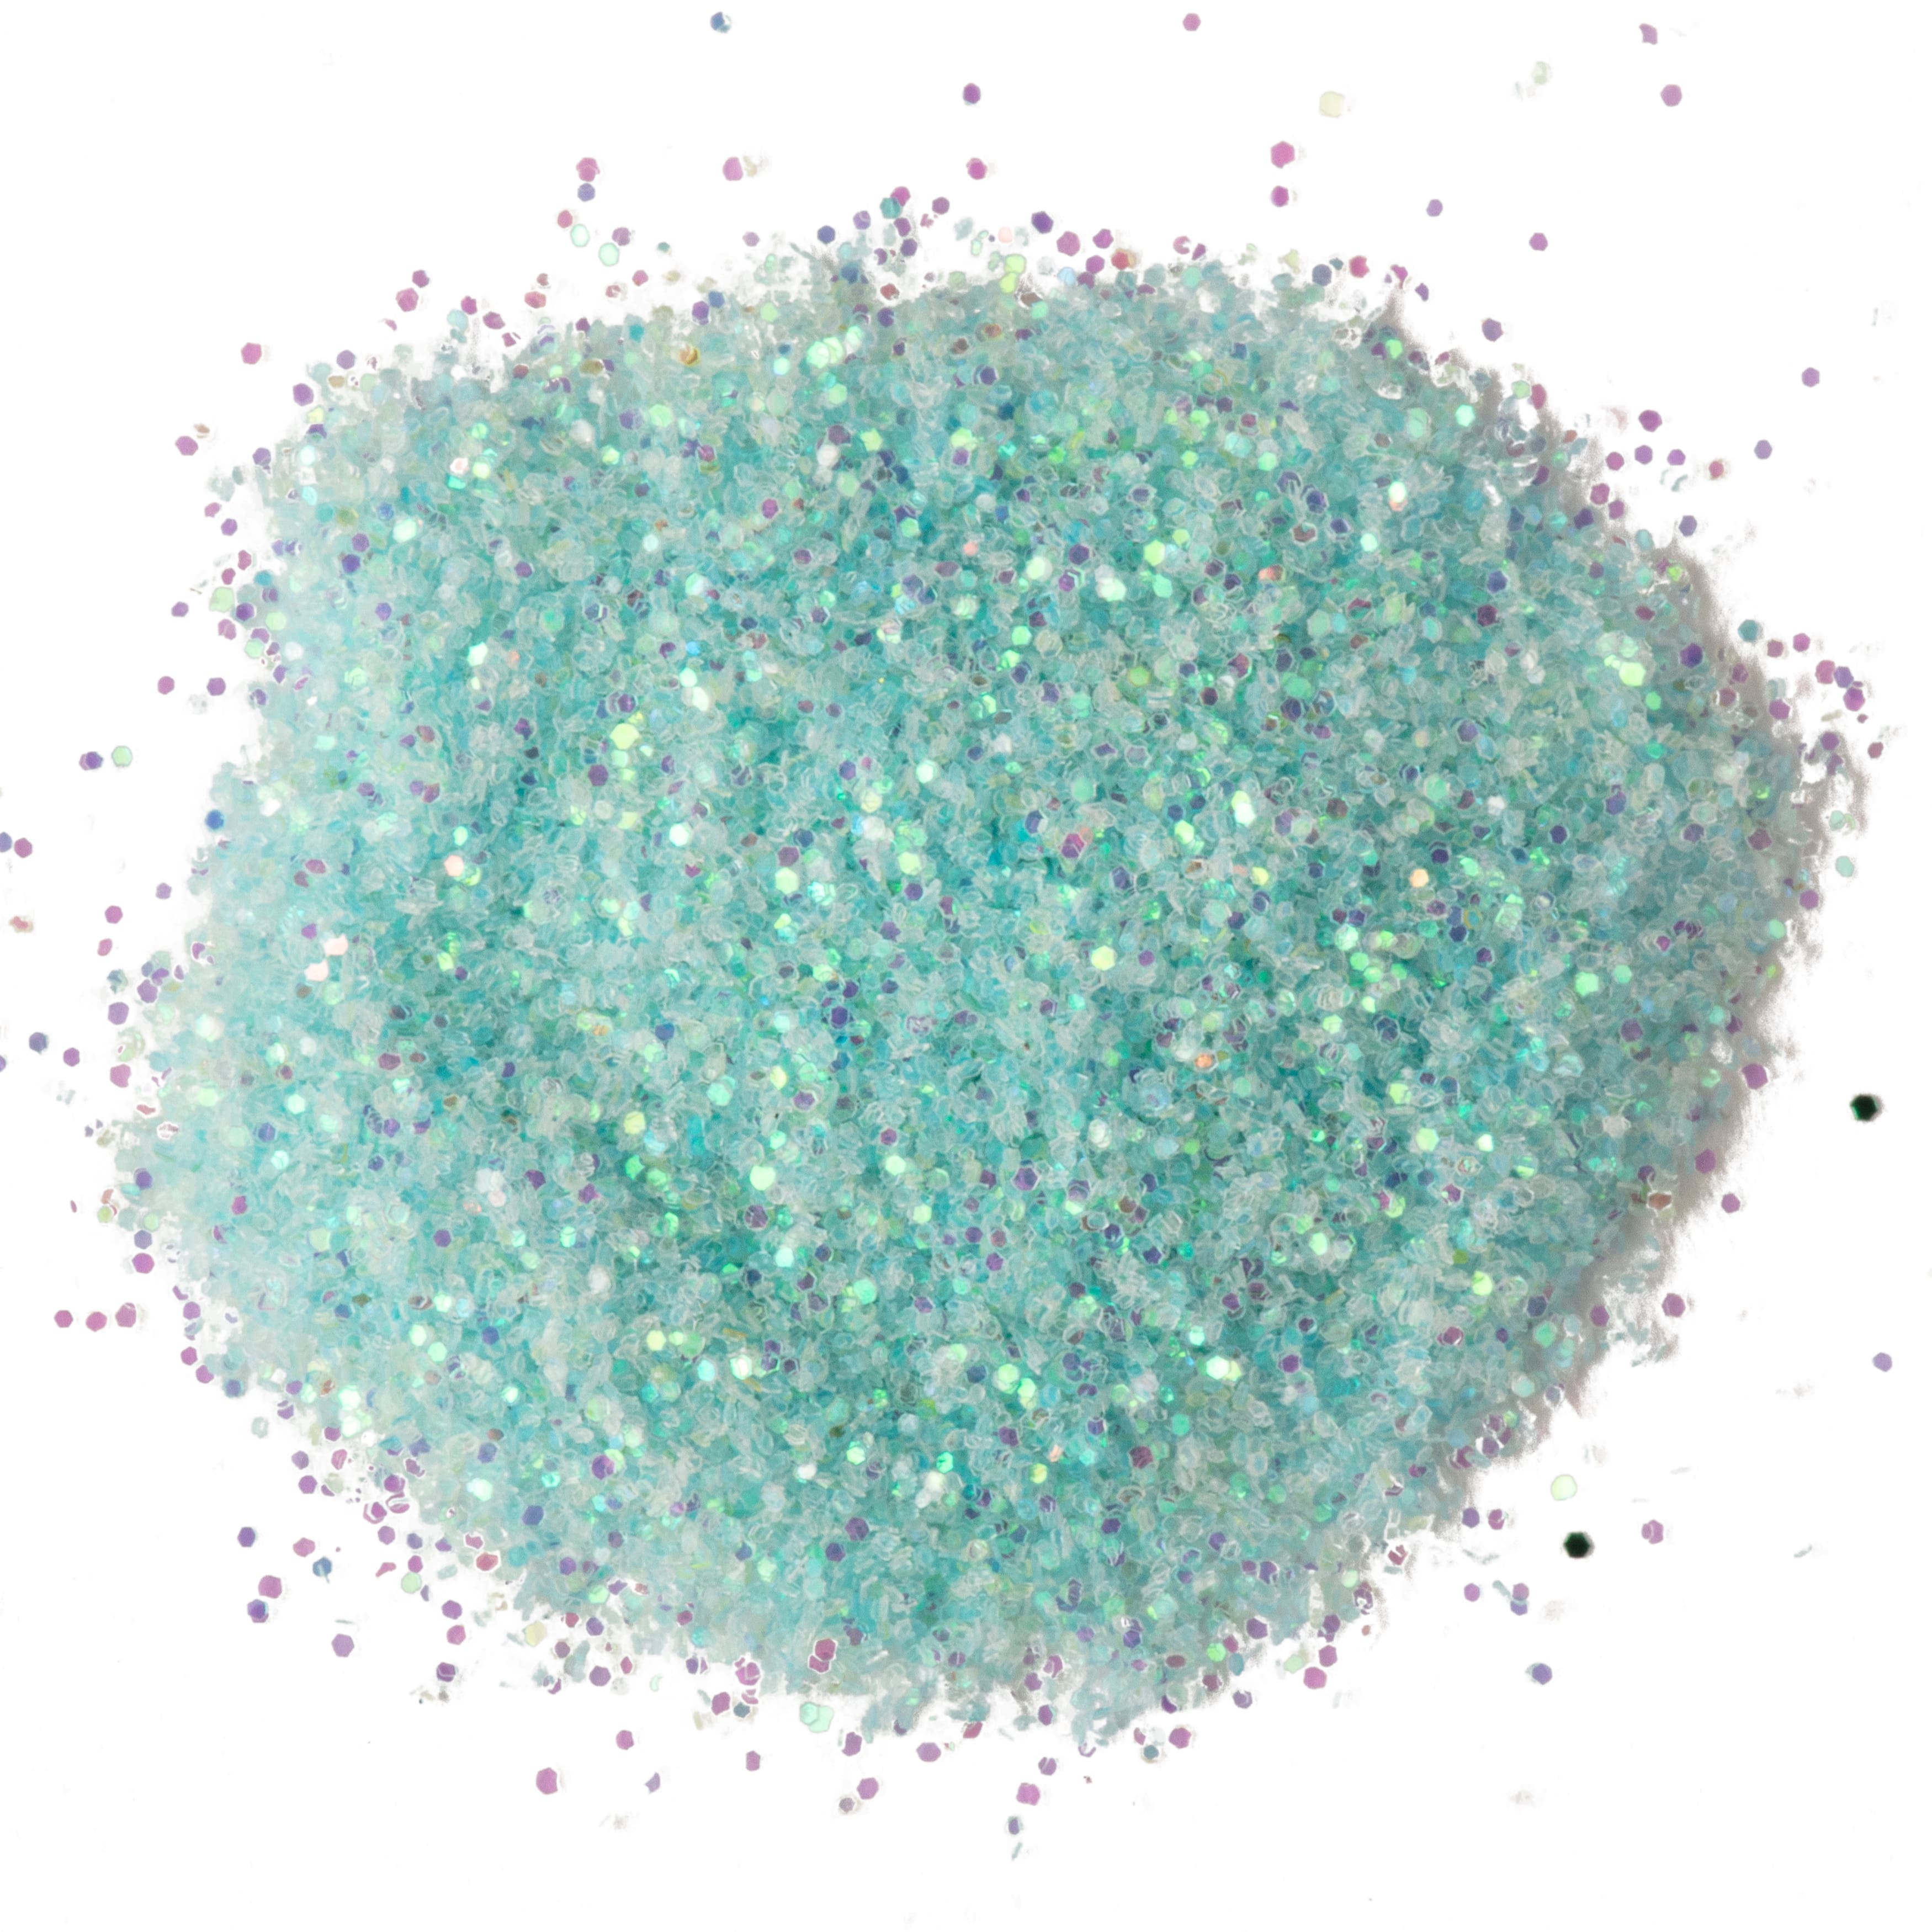 12 Packs: 12 ct. (144 total) Shaped Glitter Pack by Creatology™ 